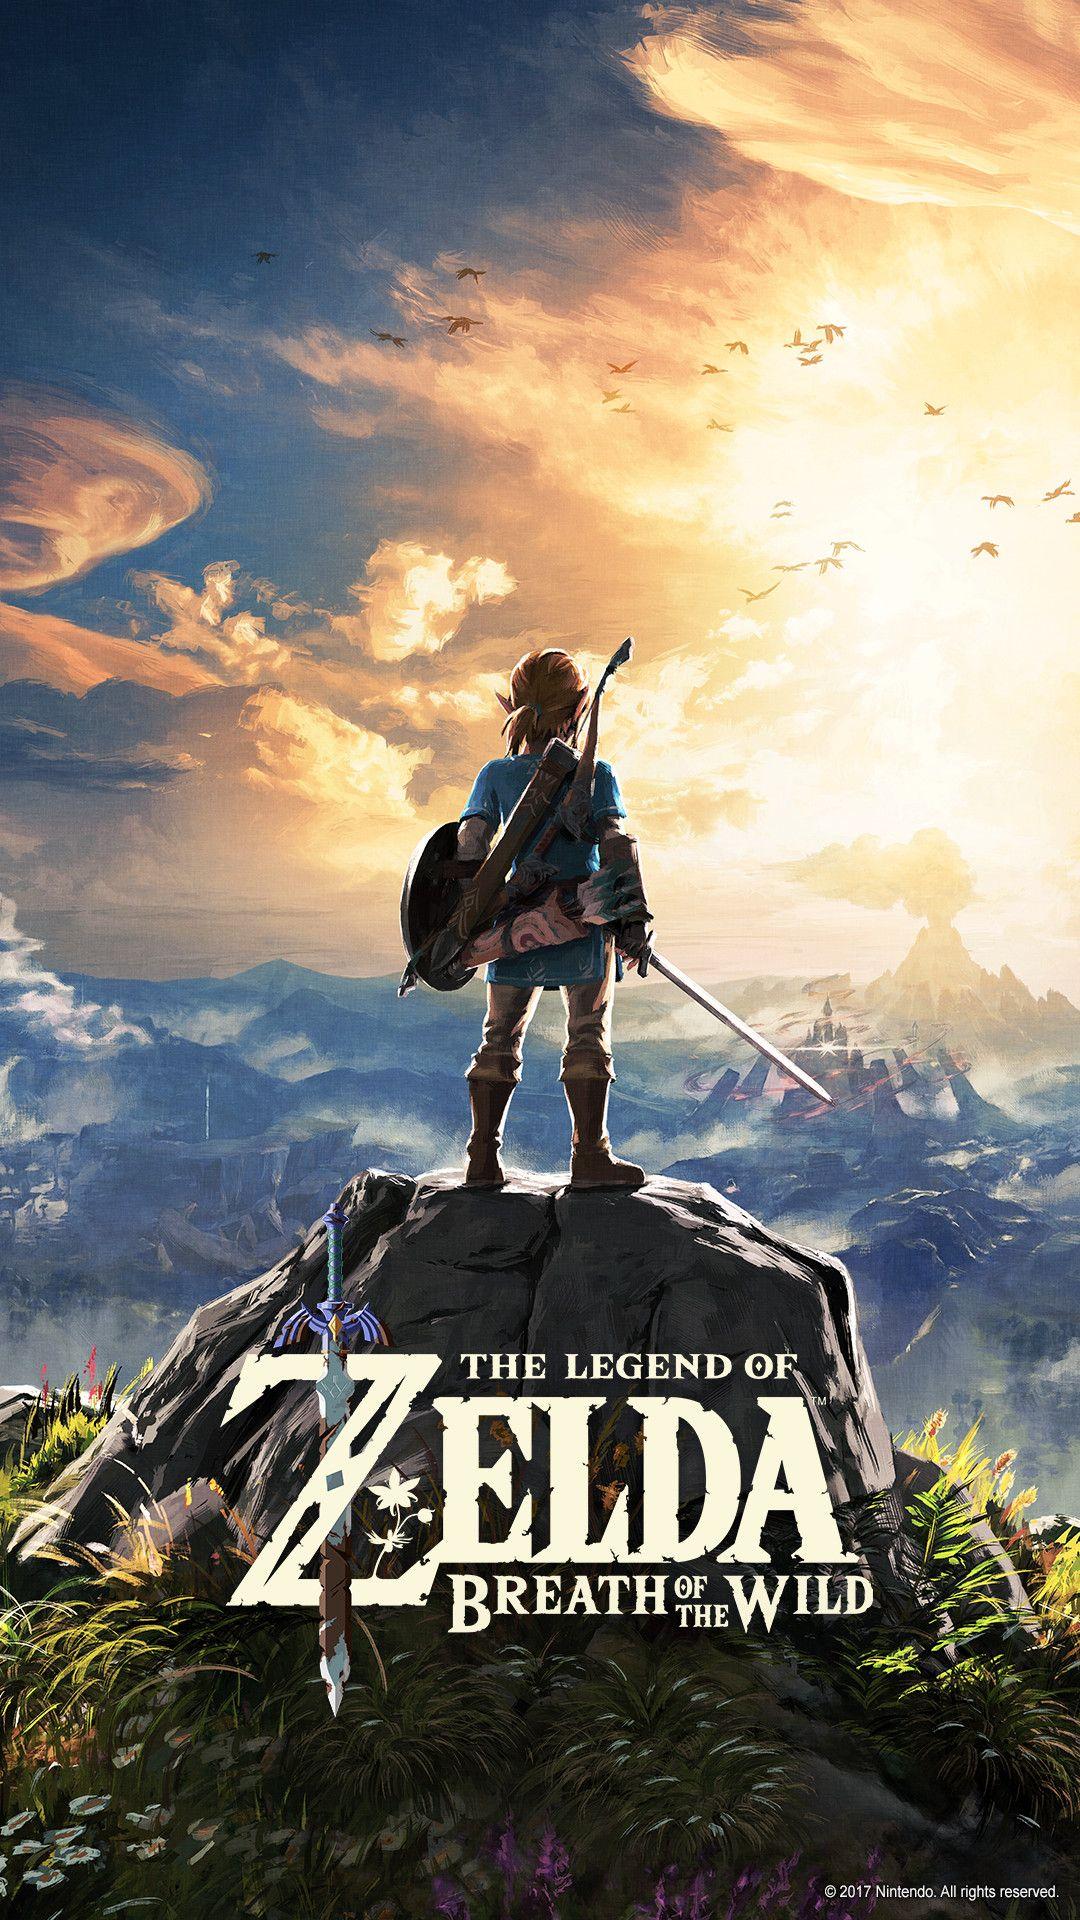 The Legend of Zelda™: Breath of the Wild for the Nintendo Switch™ home gaming system and Wii U™ console